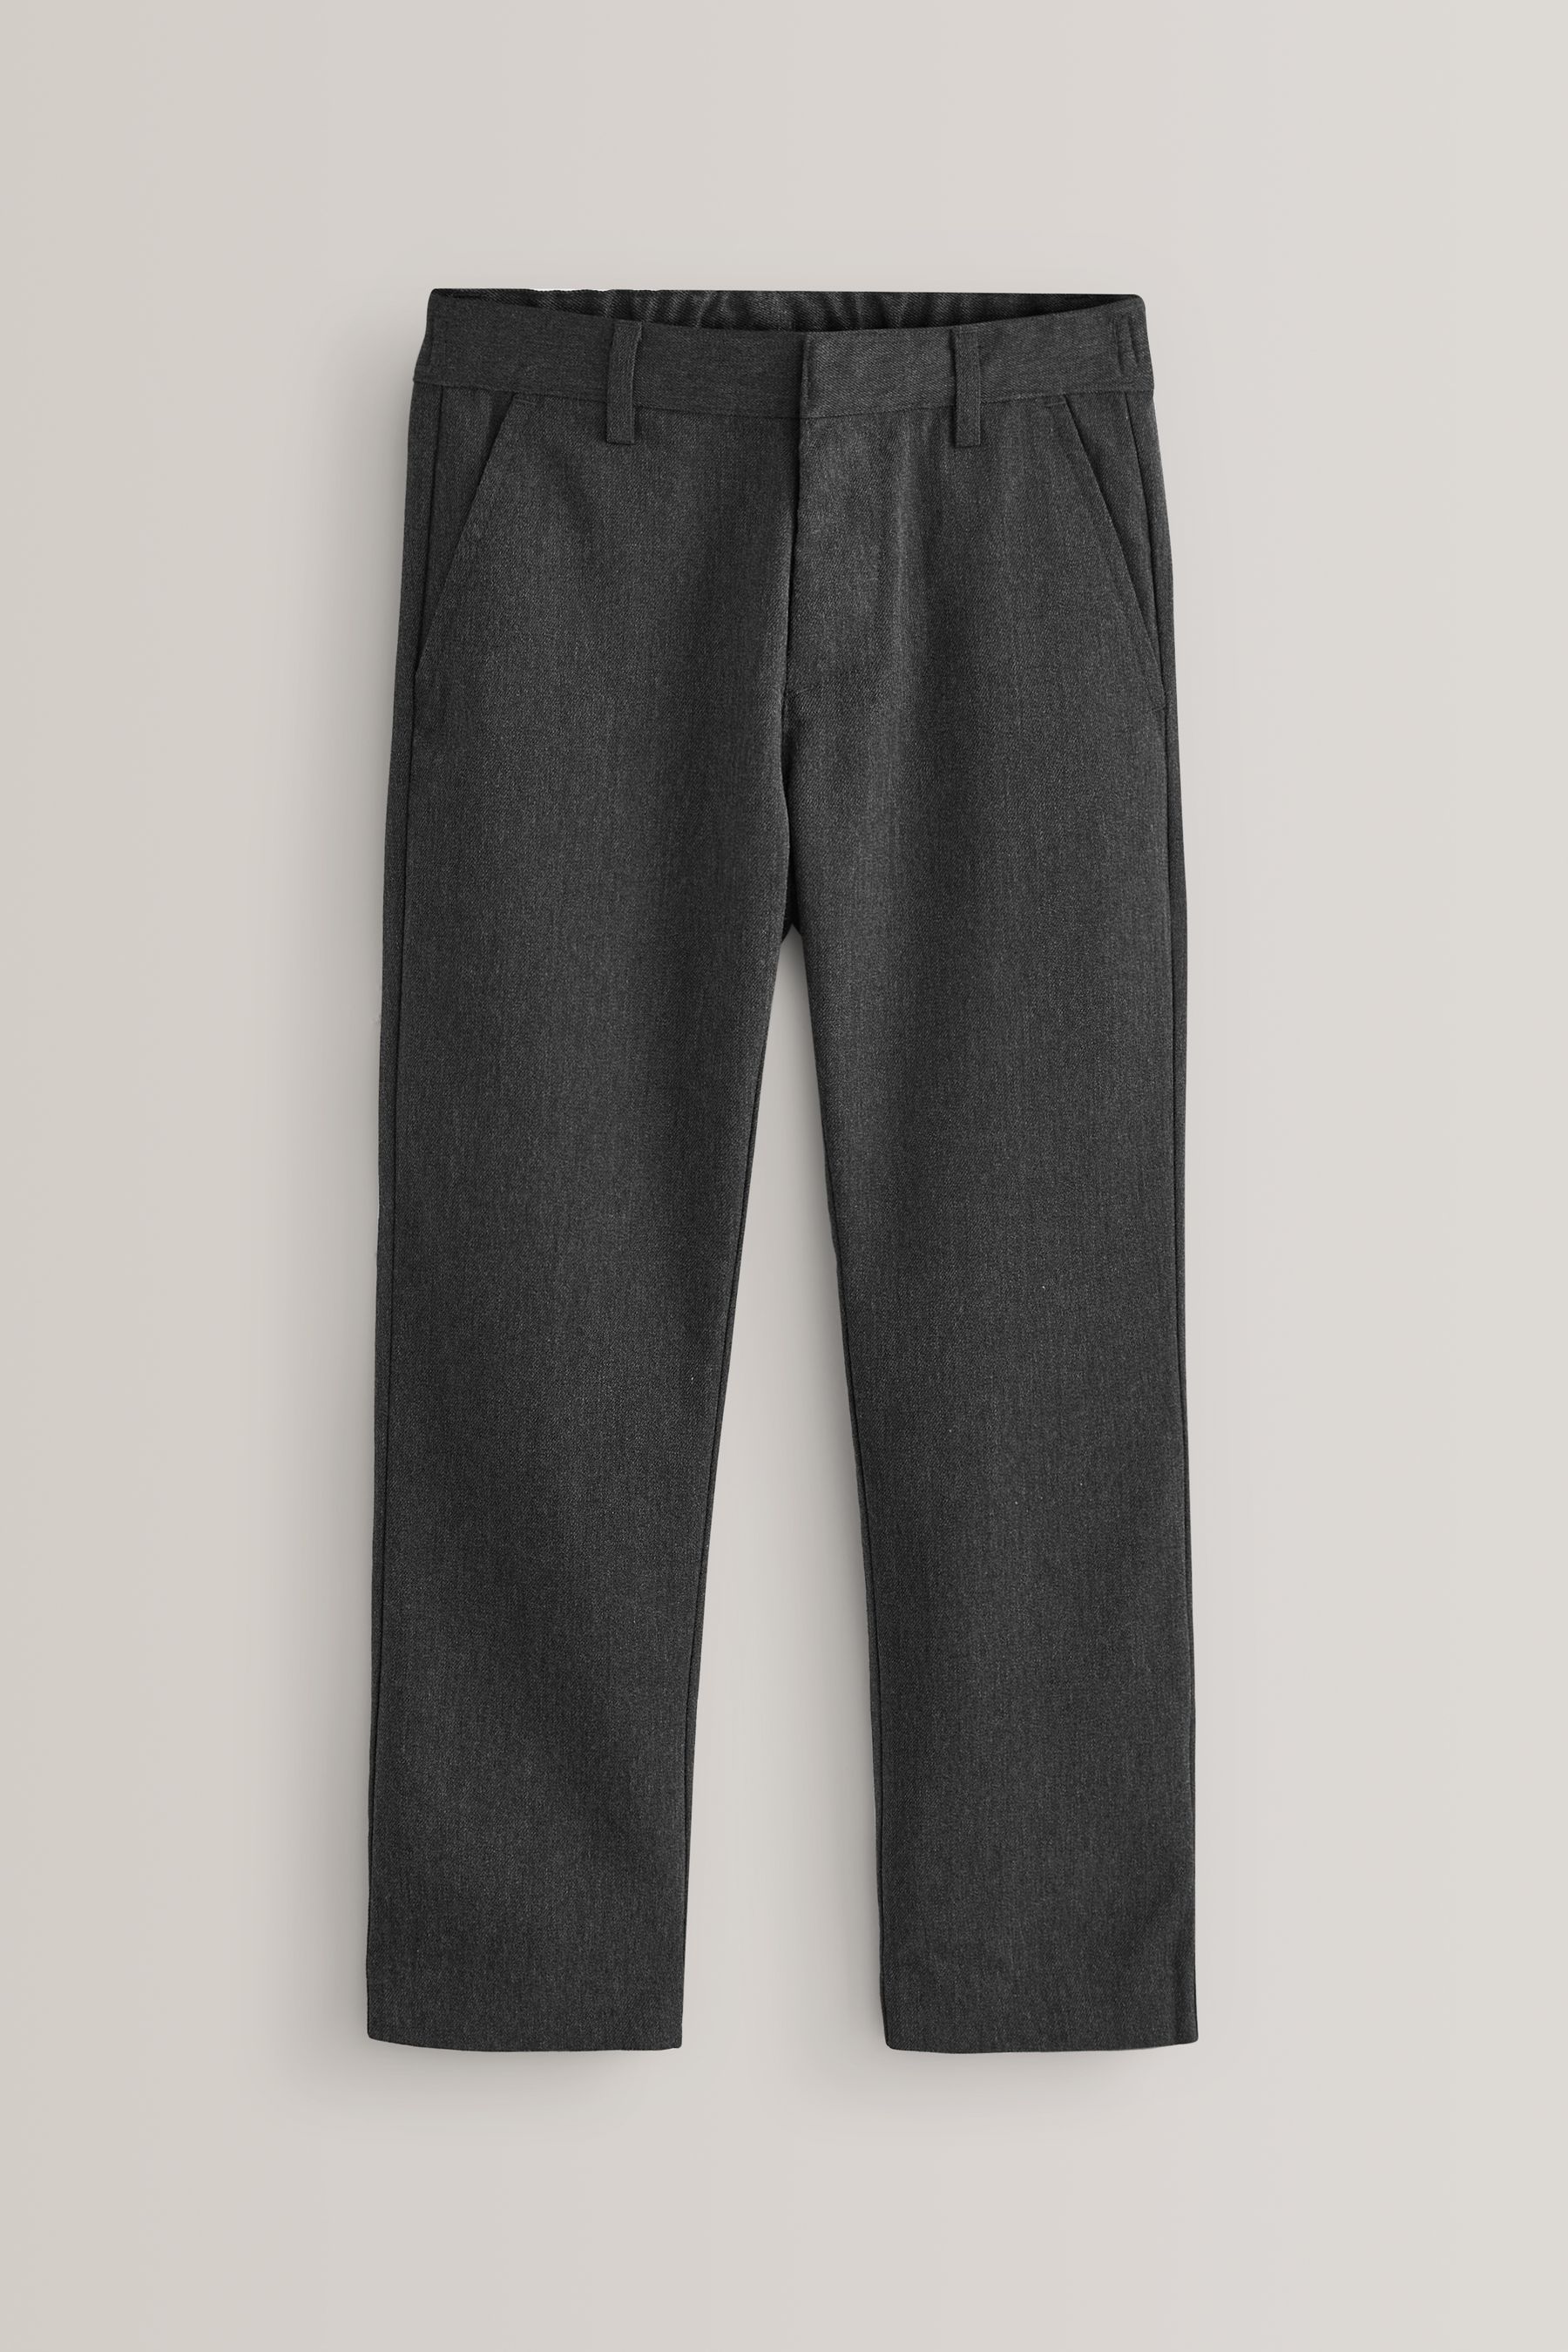 Buy Flat Front Trousers (3-17yrs) from the Next UK online shop